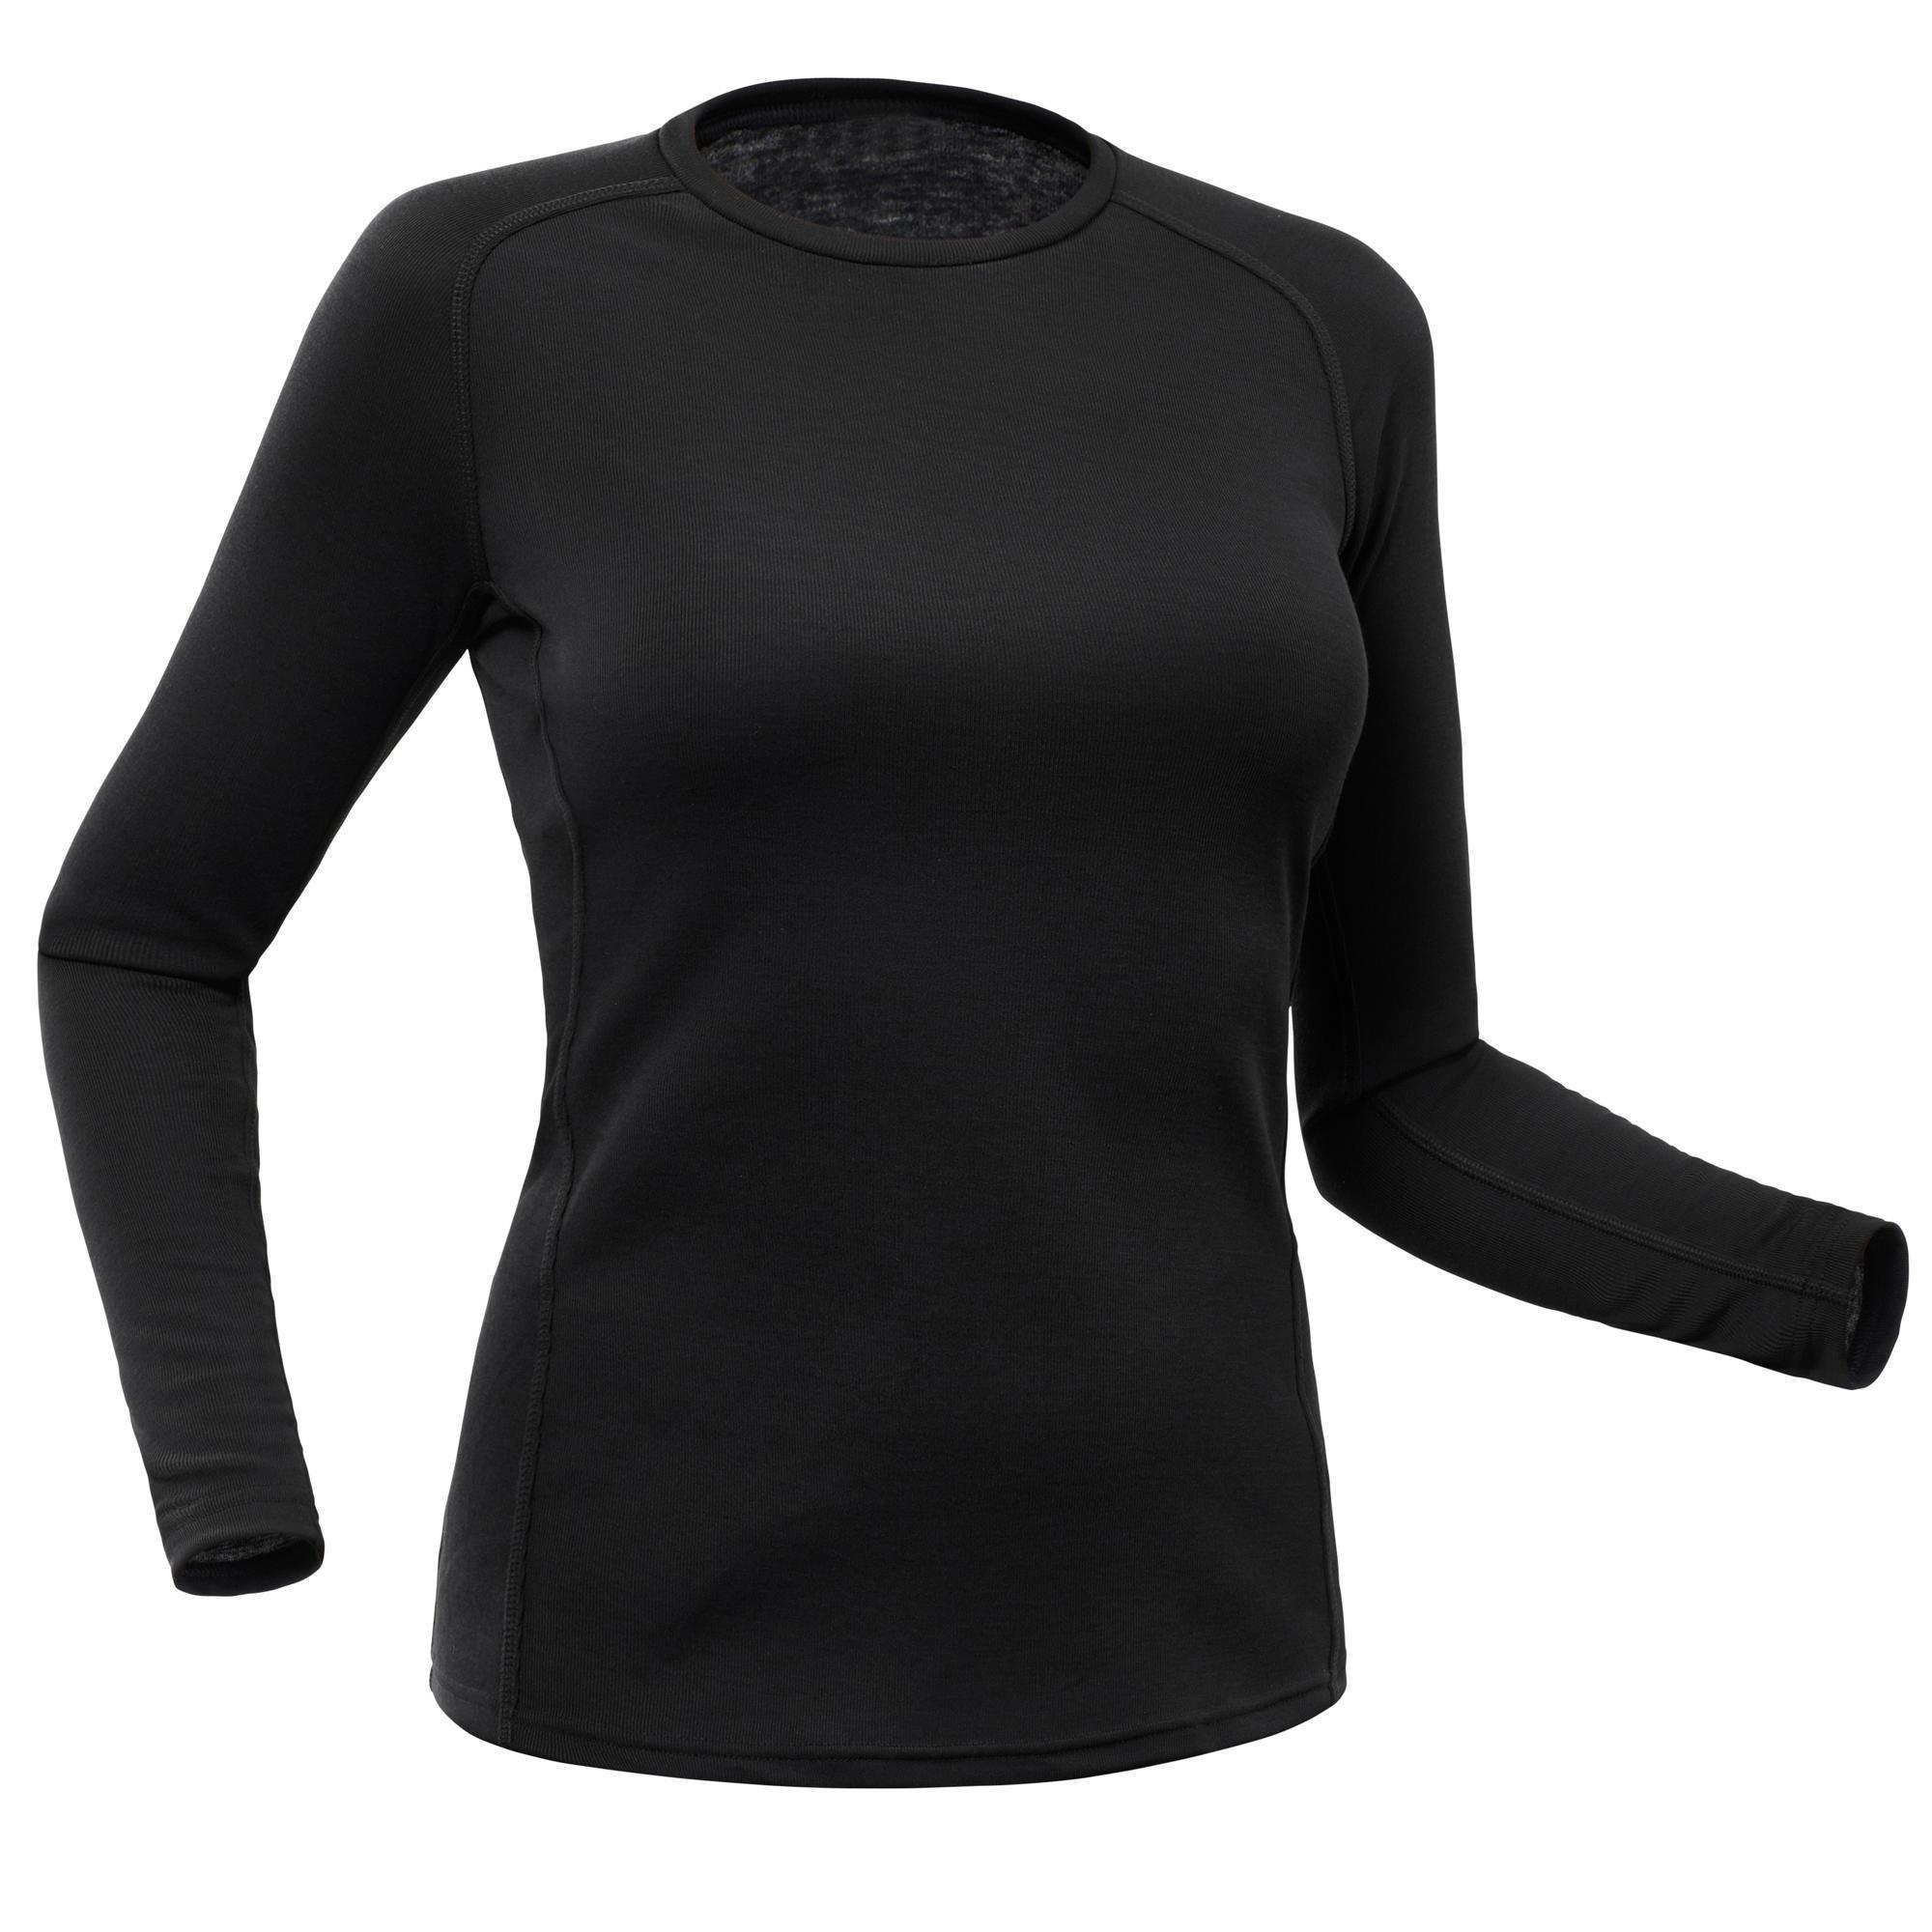 Thermokleding Clearance, GET 53% OFF, sportsregras.com